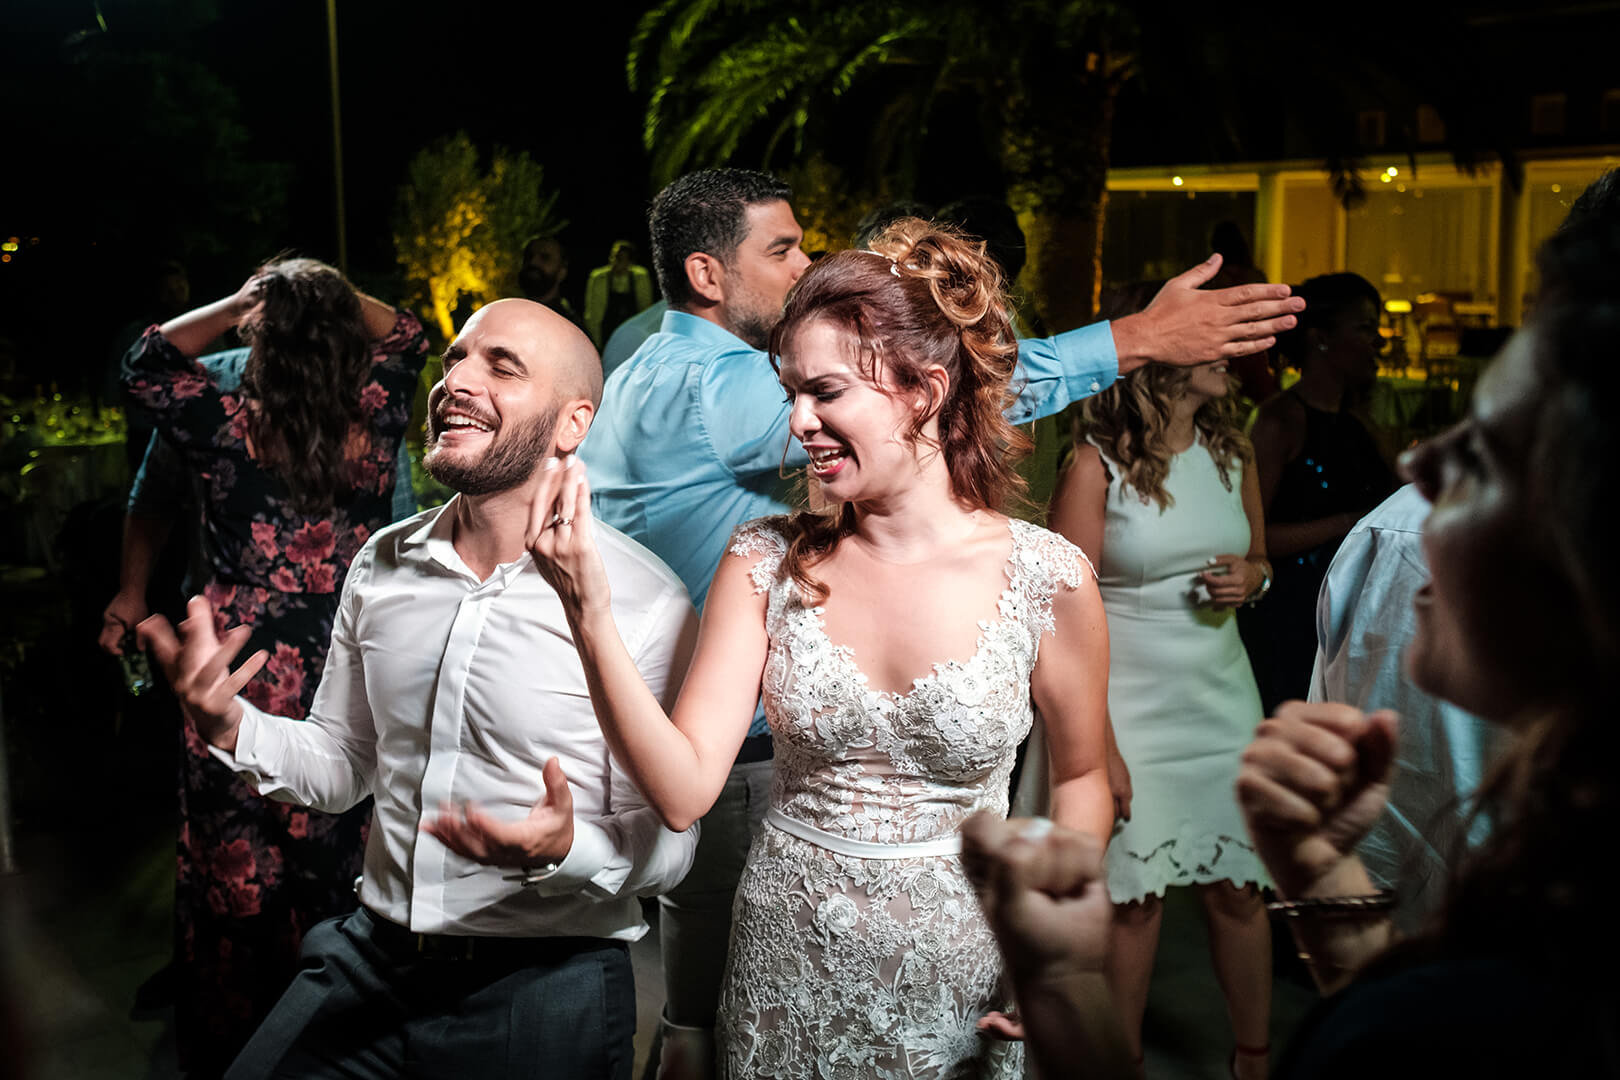 Bride rocks the dance floor at her wedding party in Athens